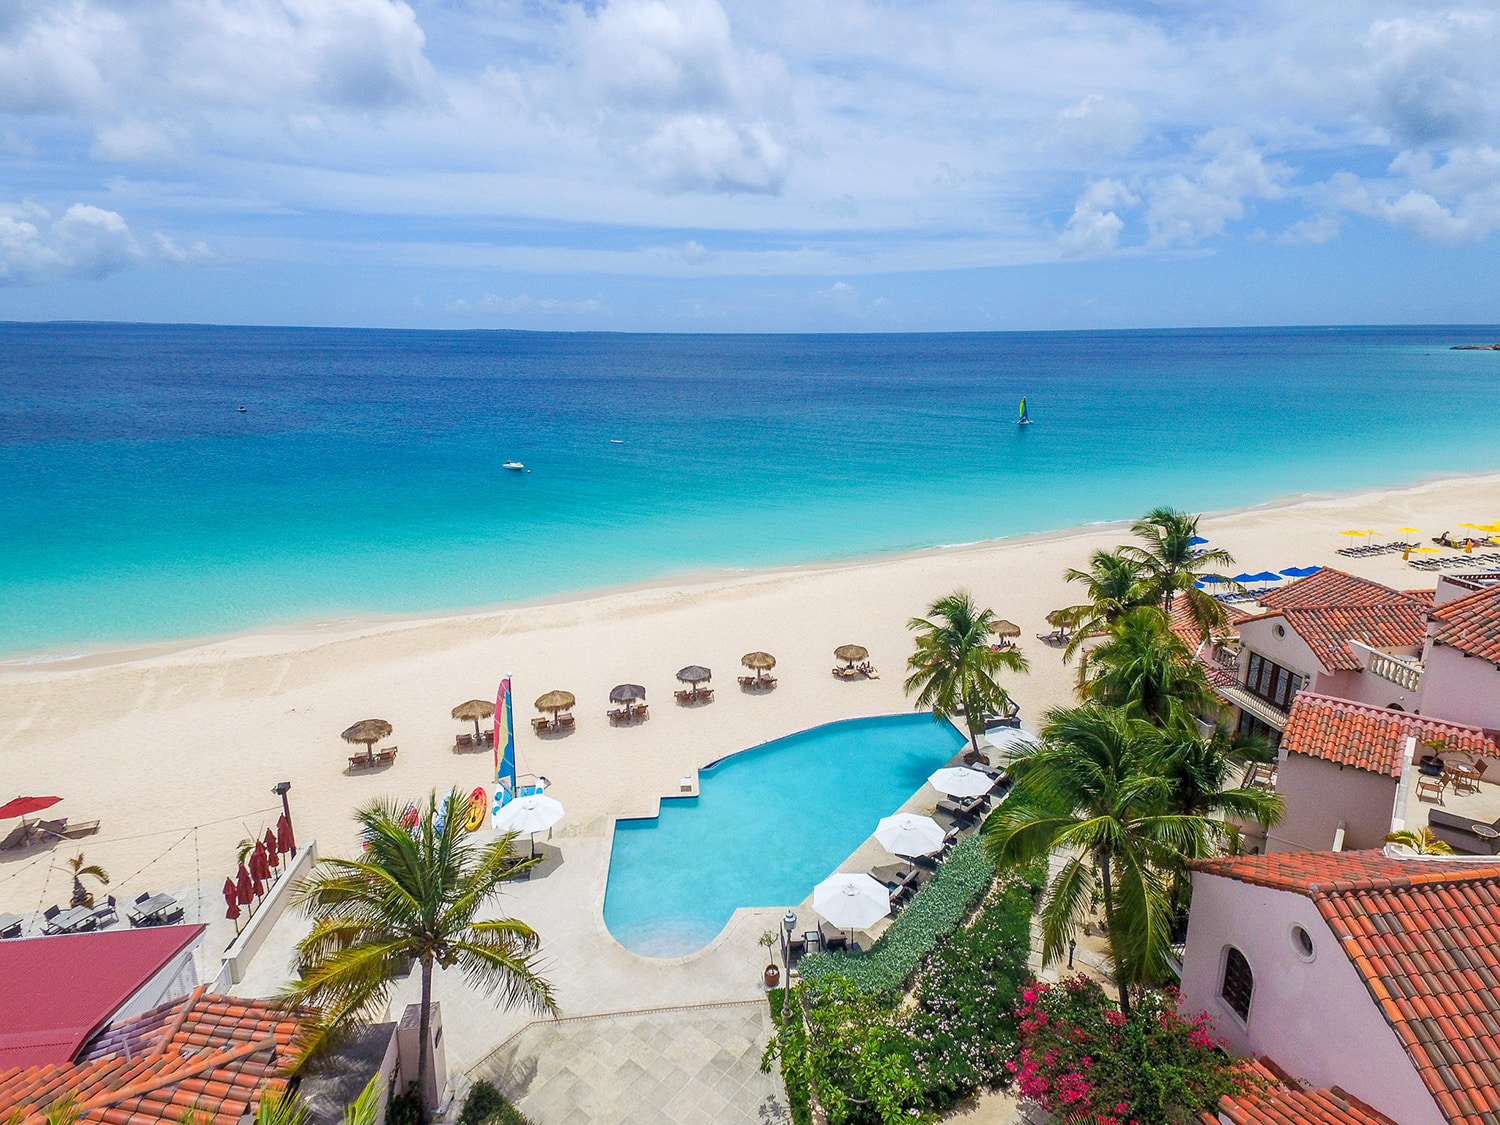 An aerial view of the pool and beach at Frangipani Beach Resort, located on Meads Bay in Anguilla.